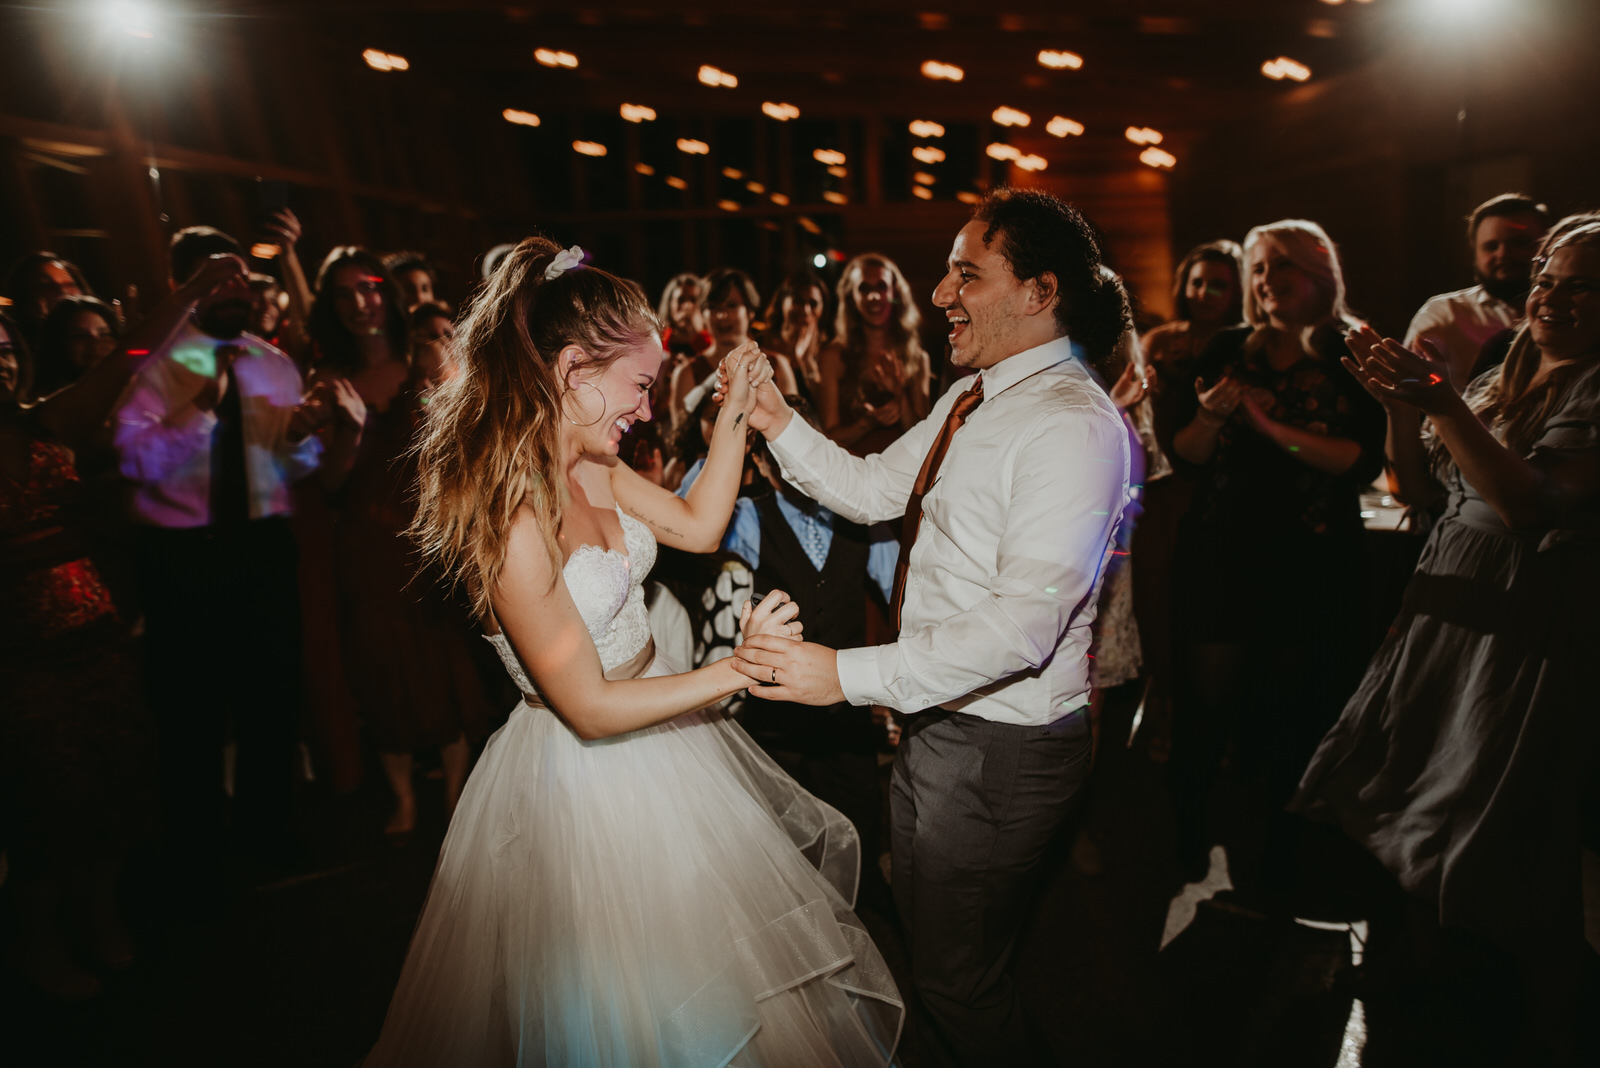 BHLDN bride and groom dance, Crazy egyptian dance party, Bissell tree house Michigan, moody photography, Chicago wedding photography - The Adamkovi